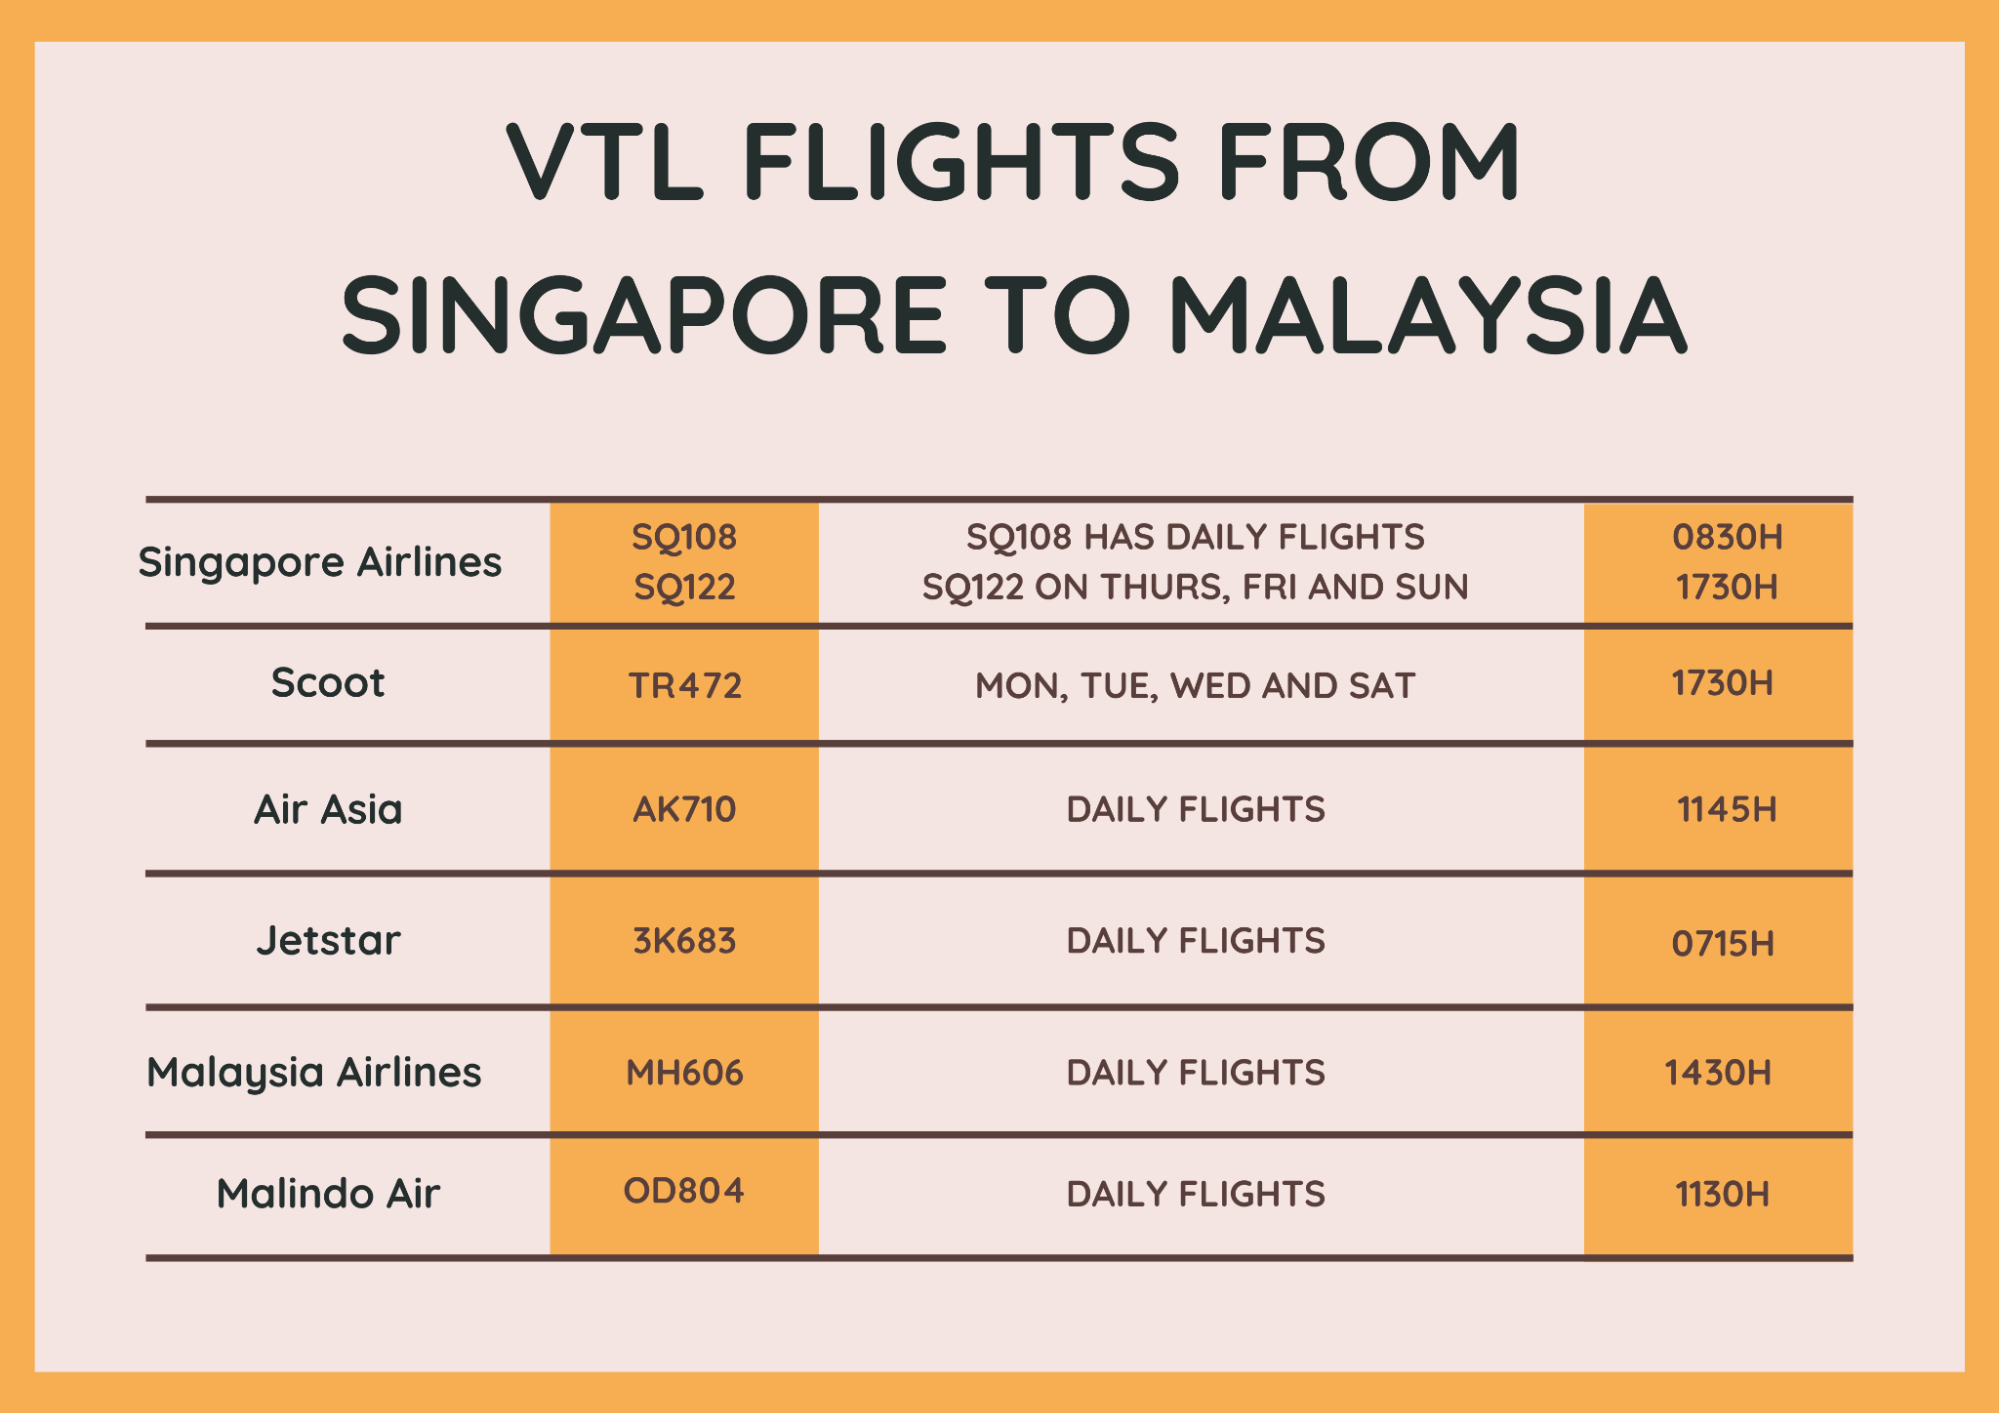 msia vtl - flight from singapore